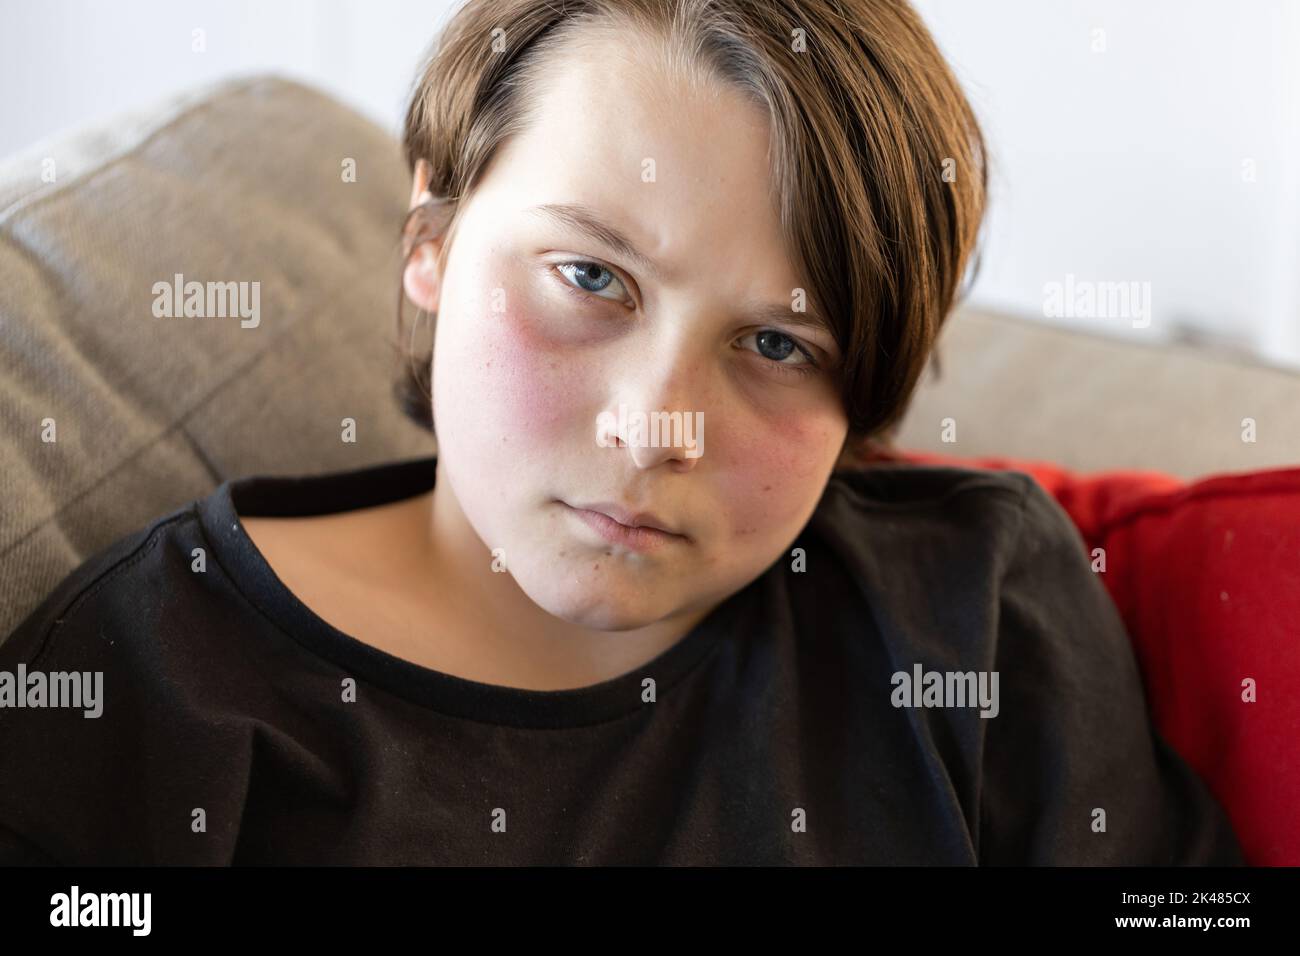 An unwell preteen boy lying on a couch looking at the camera, his cheeks are red from a fever and he looks miserable Stock Photo